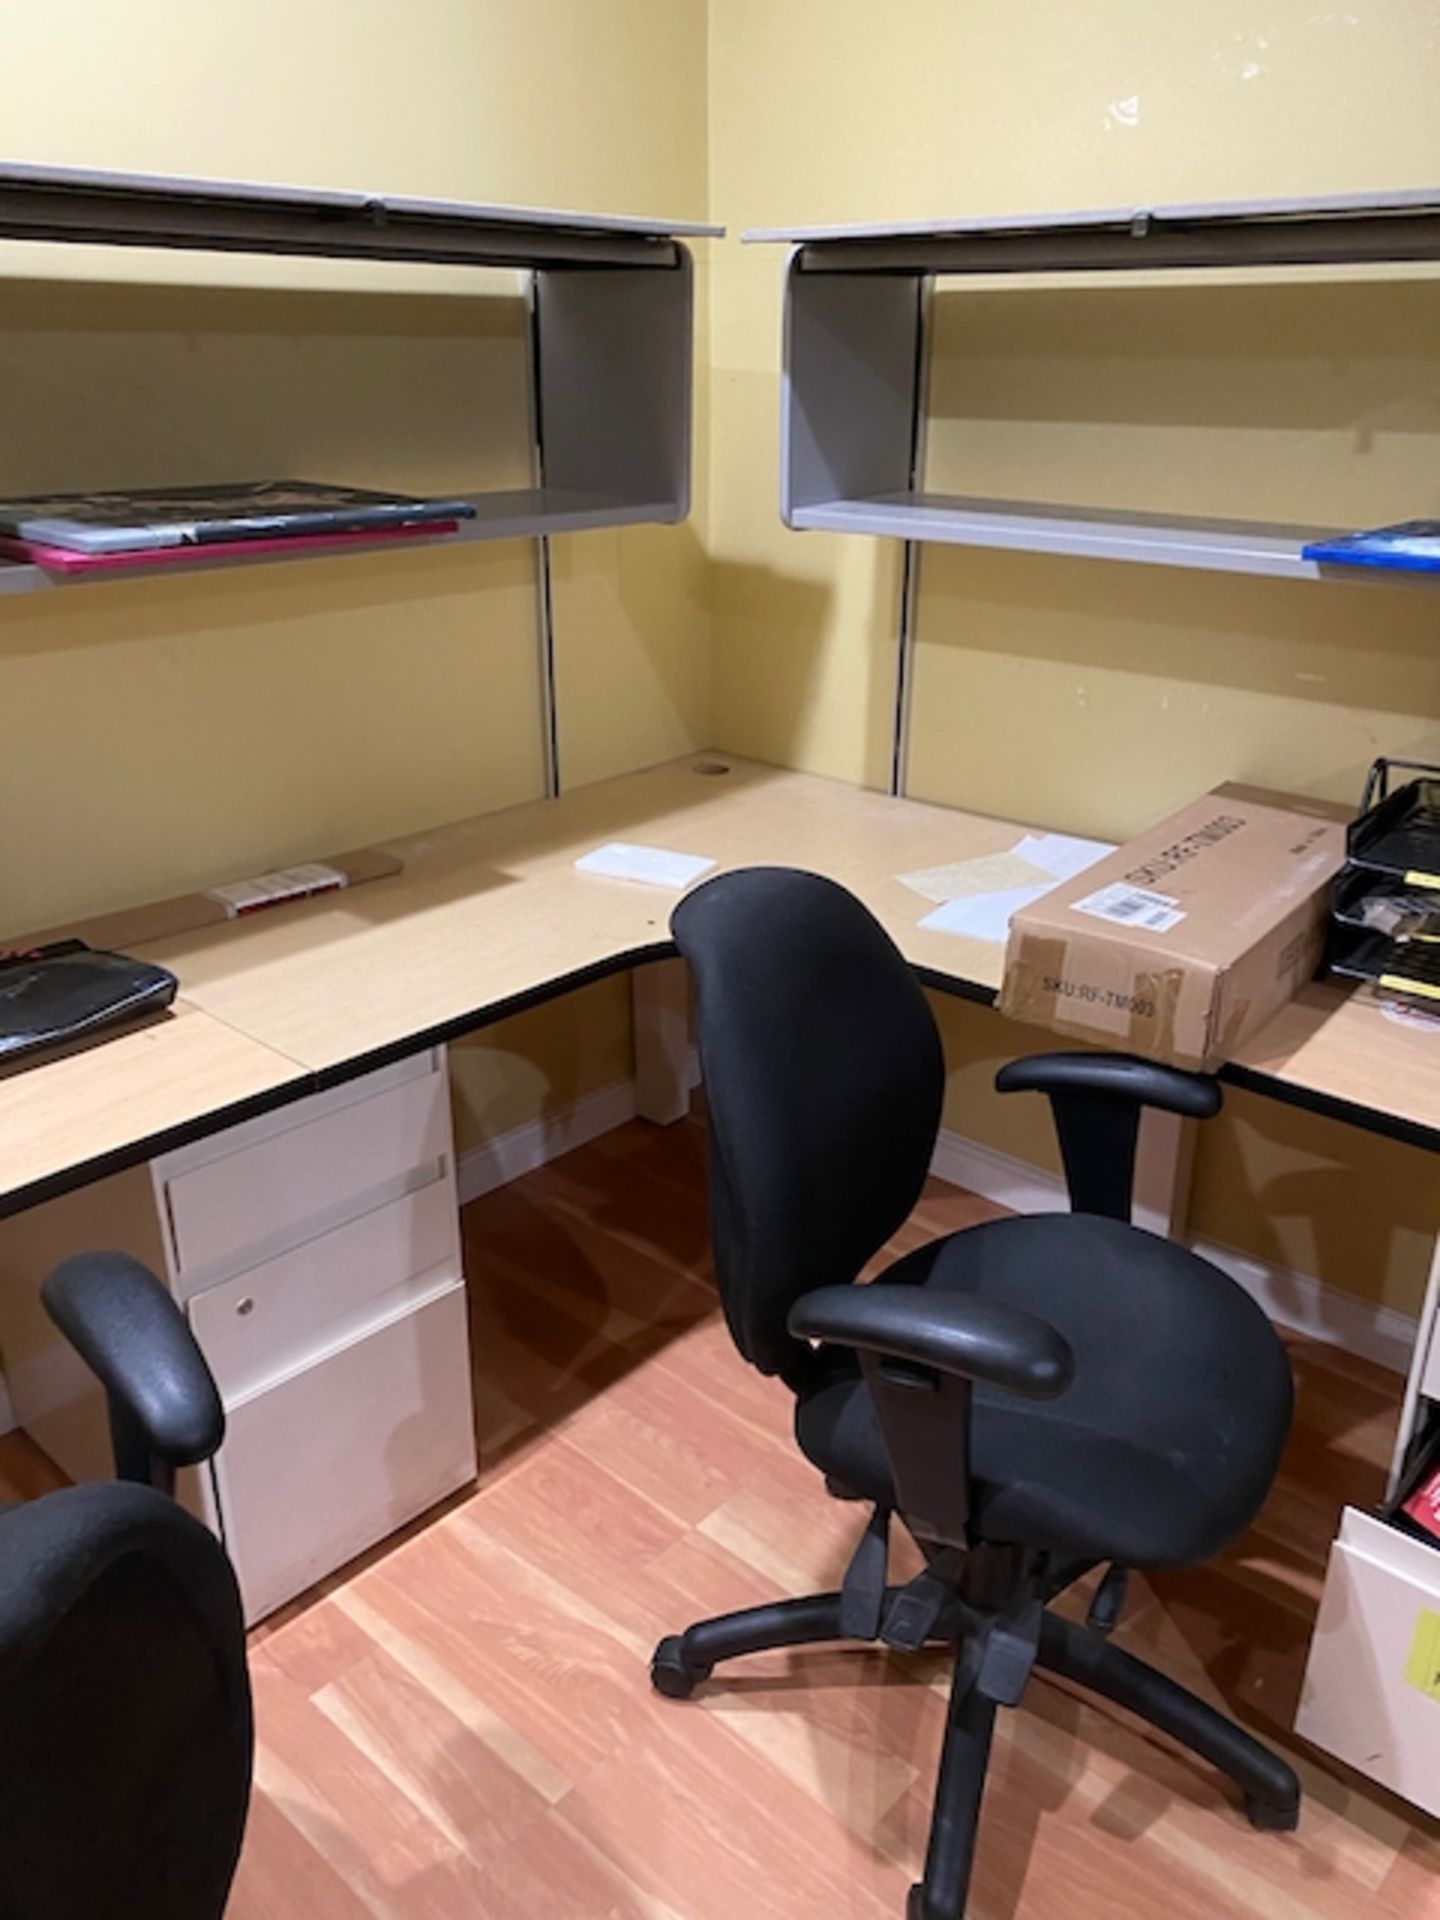 Workstations With Desks And Wall-Mounted Shelves | Rig Fee $250 - Image 3 of 3